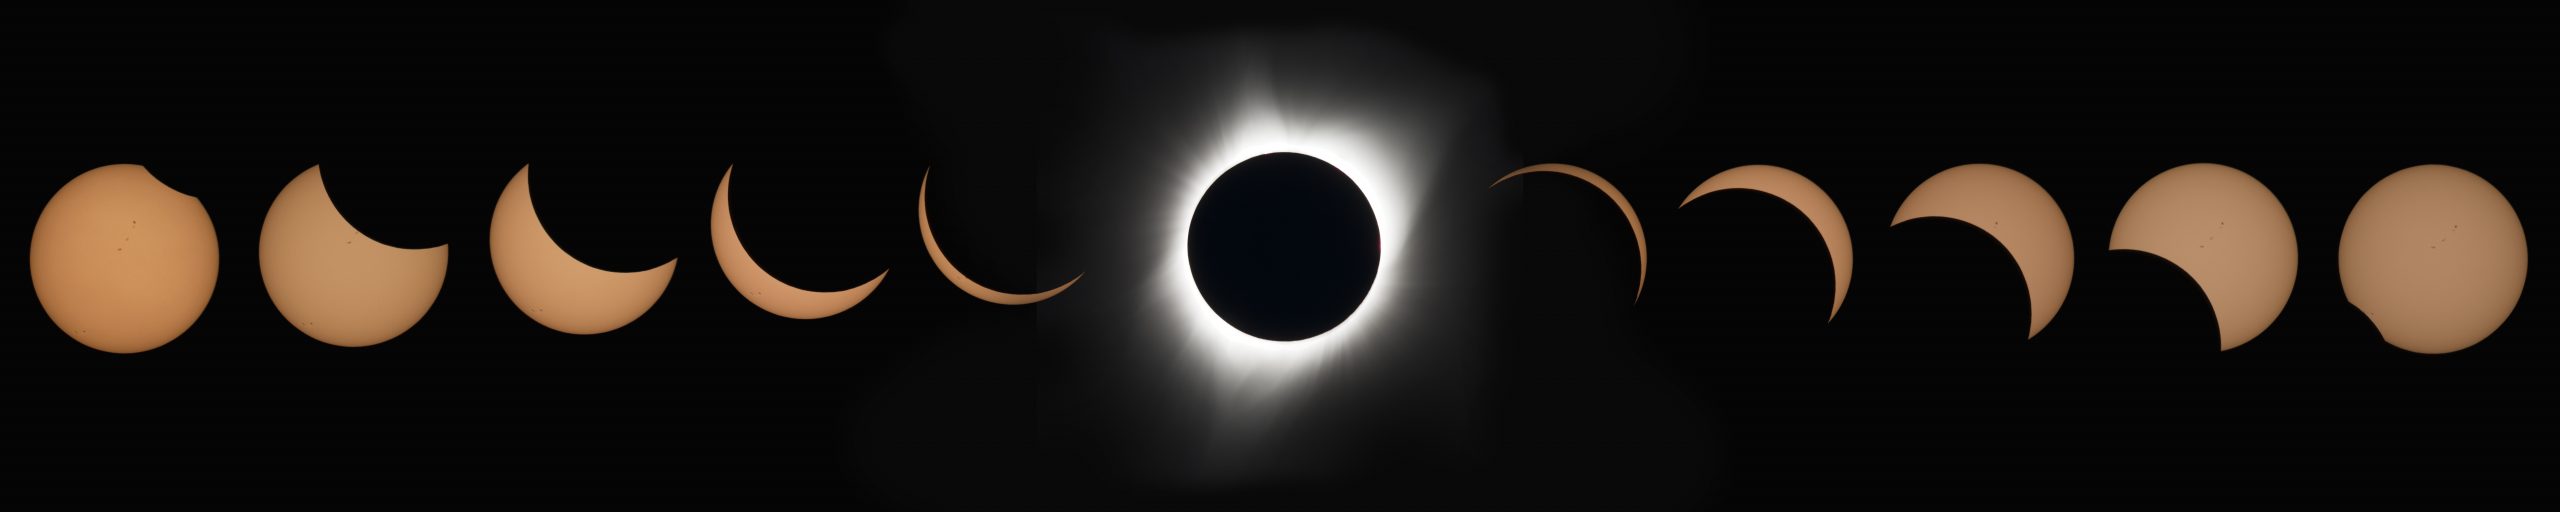 A composite image of the August 2017 solar eclipse by NASA/Aubrey Gemignani.